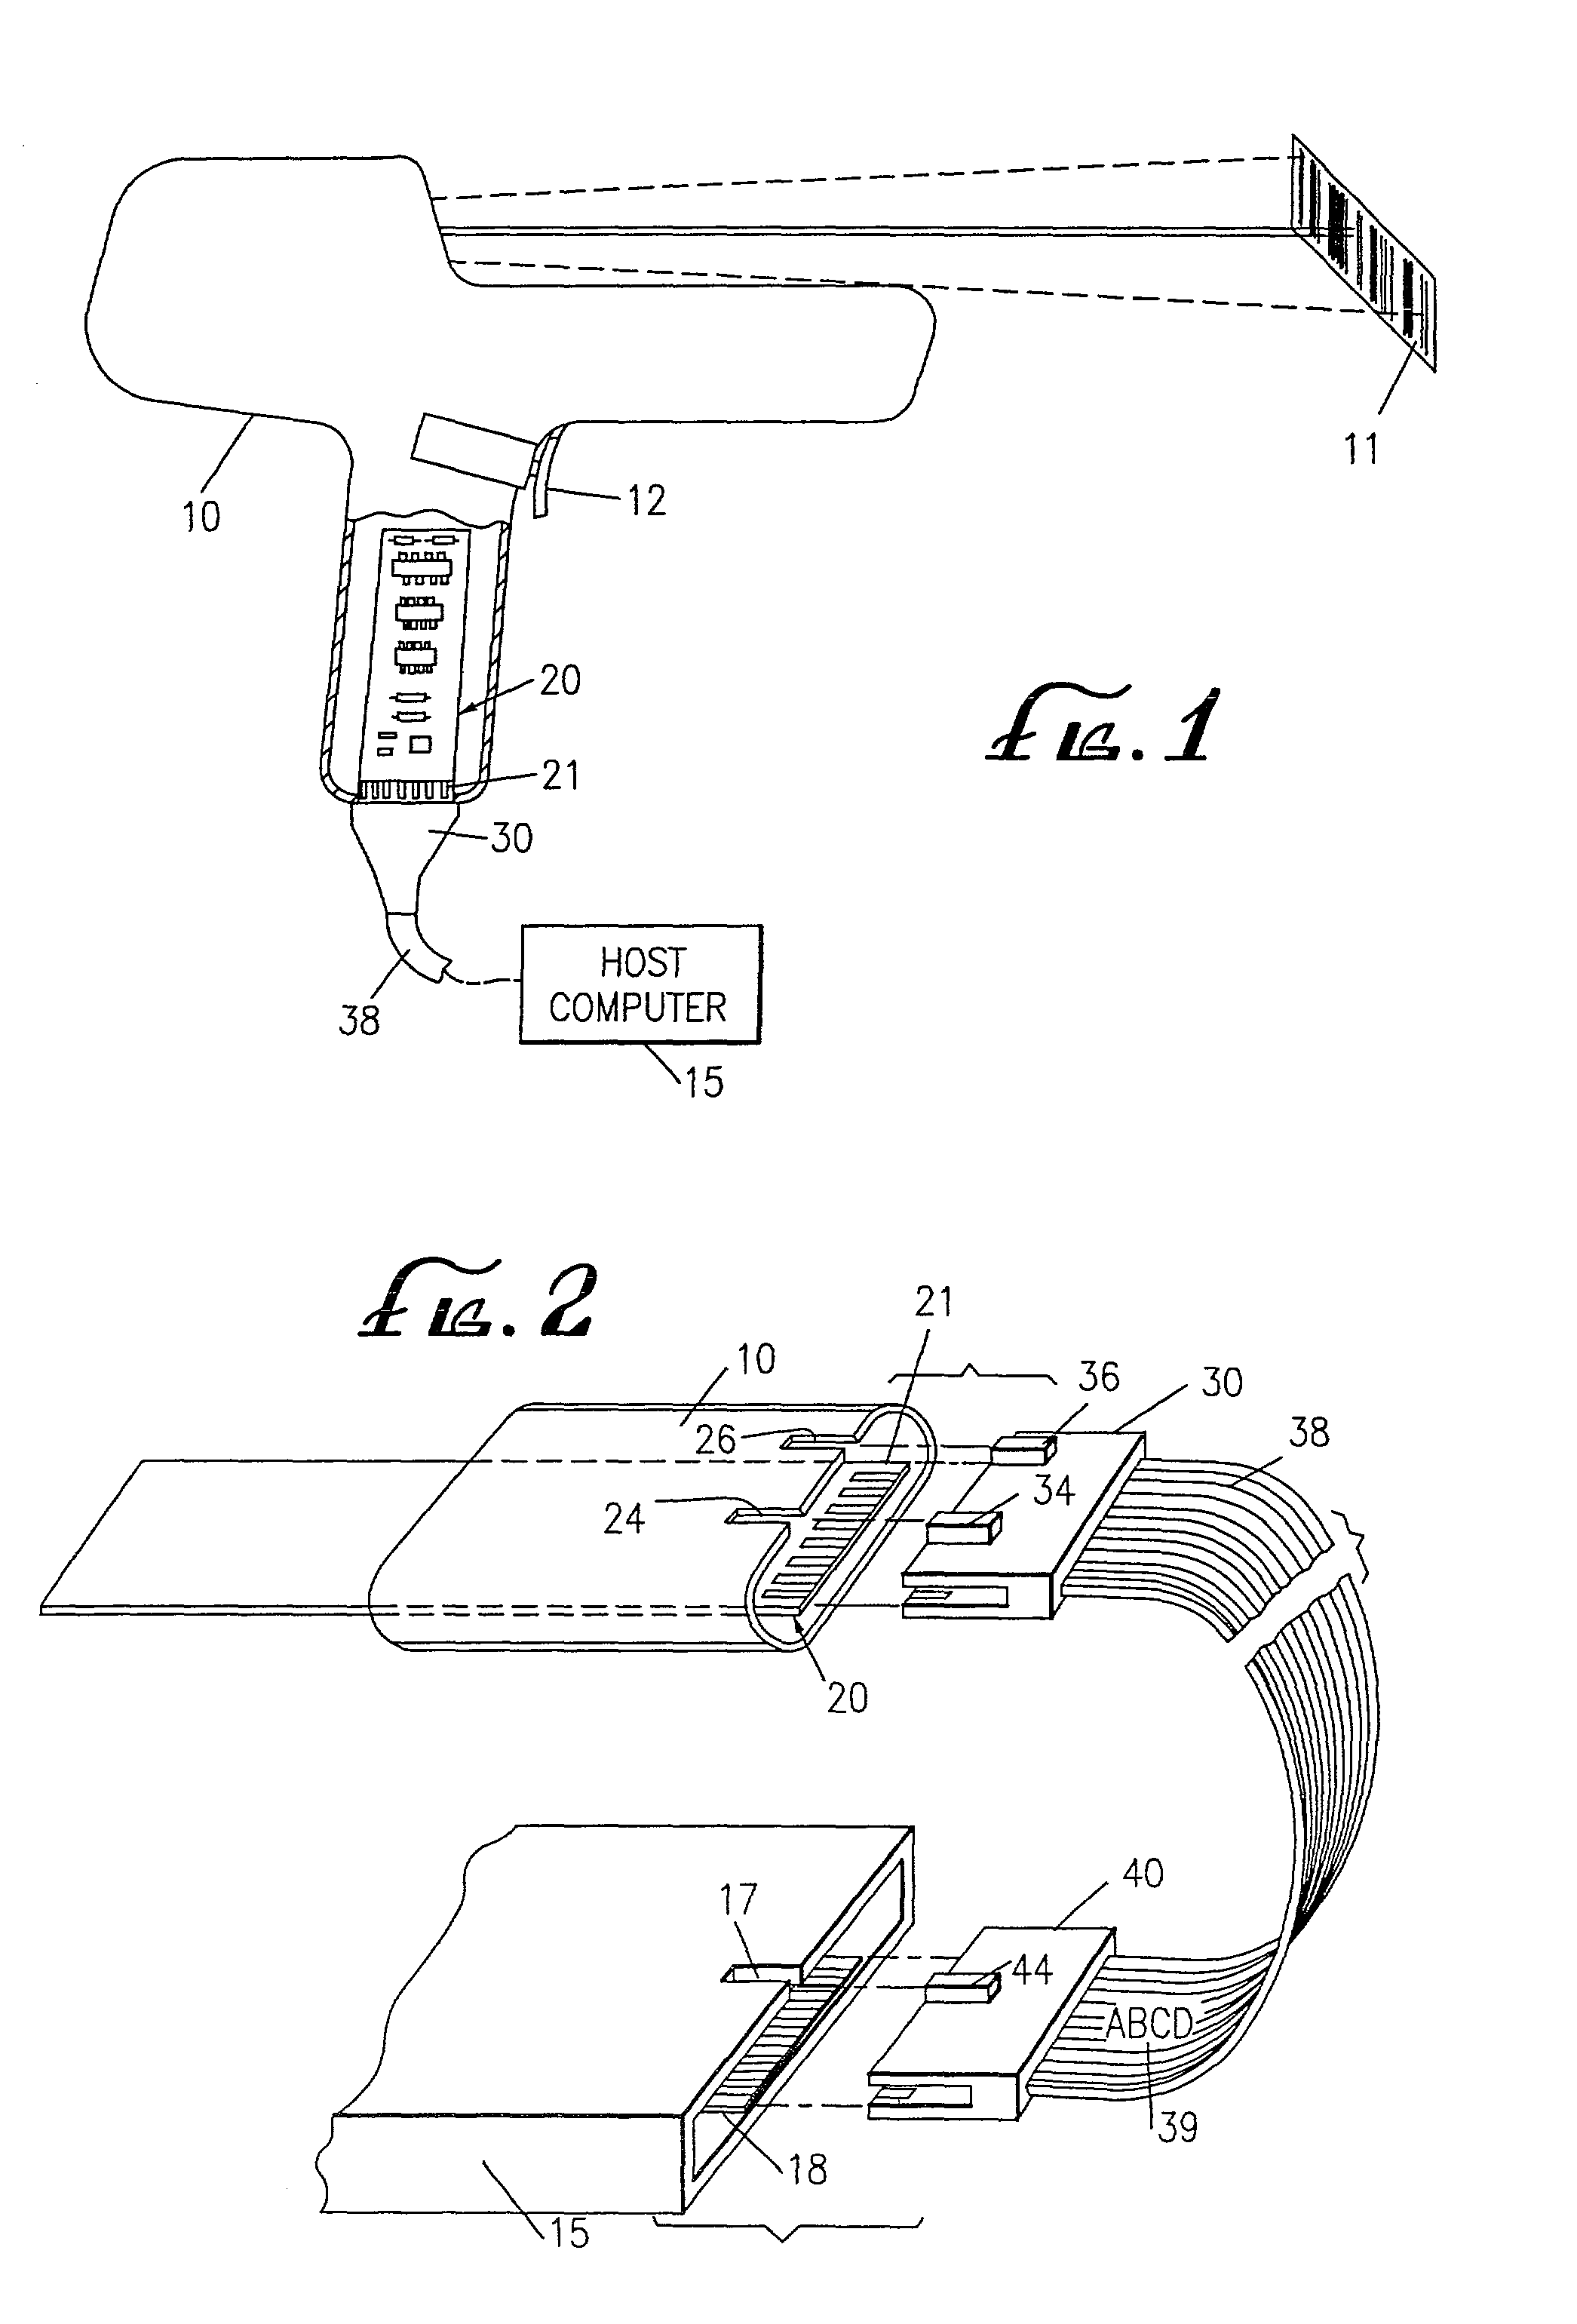 Multiple-interface selection system for computer peripherals